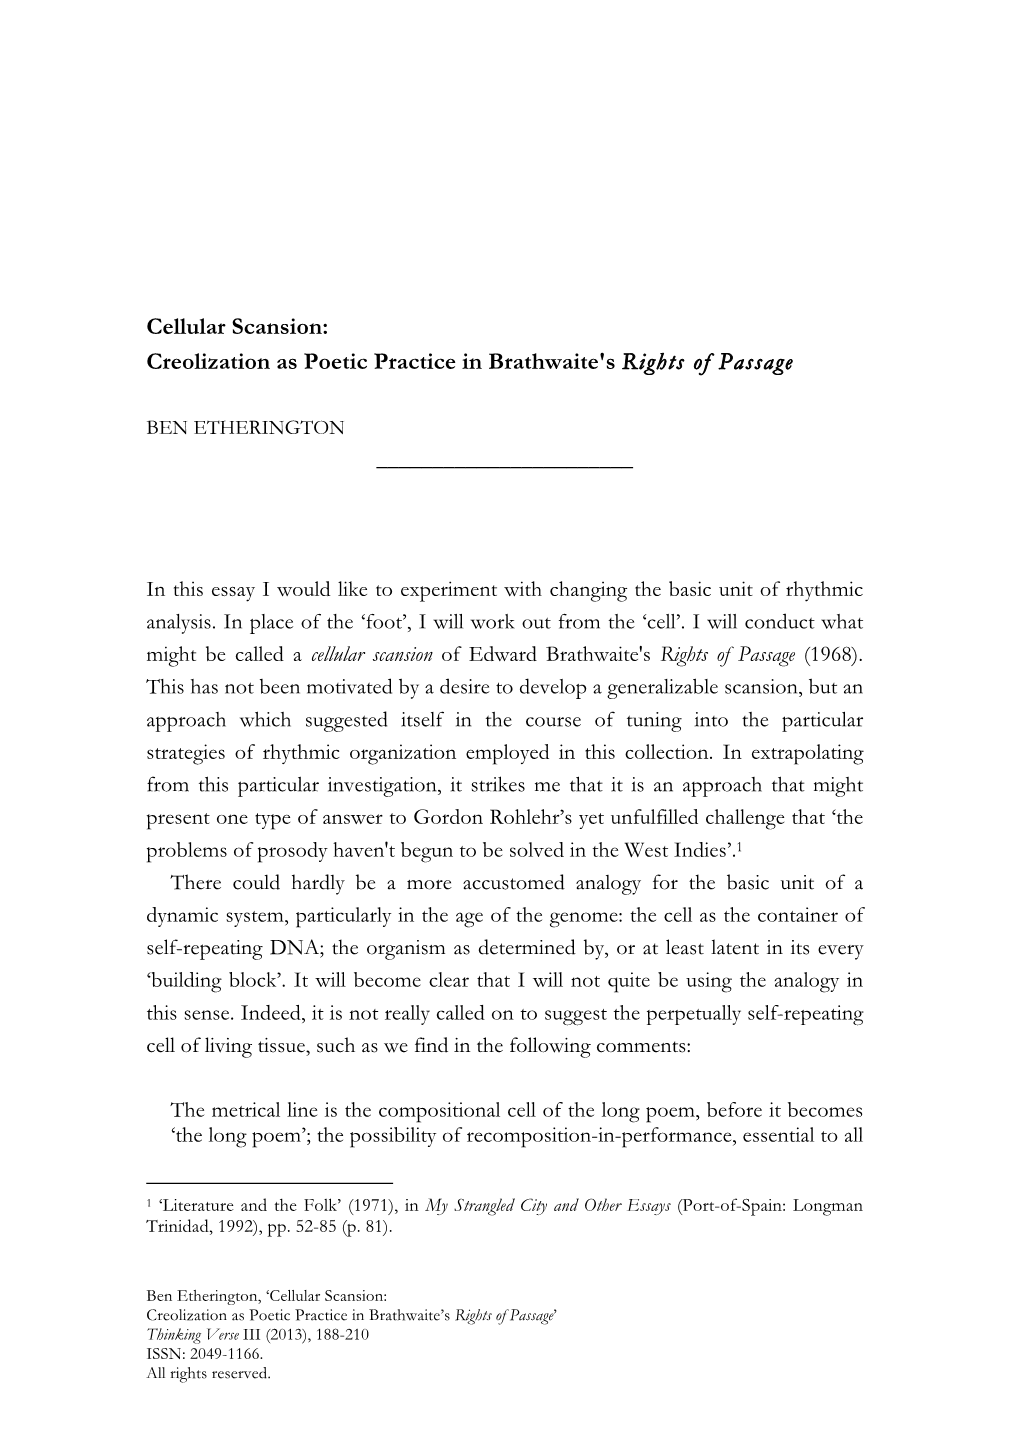 Cellular Scansion: Creolization As Poetic Practice in Brathwaite's Rights of Passage